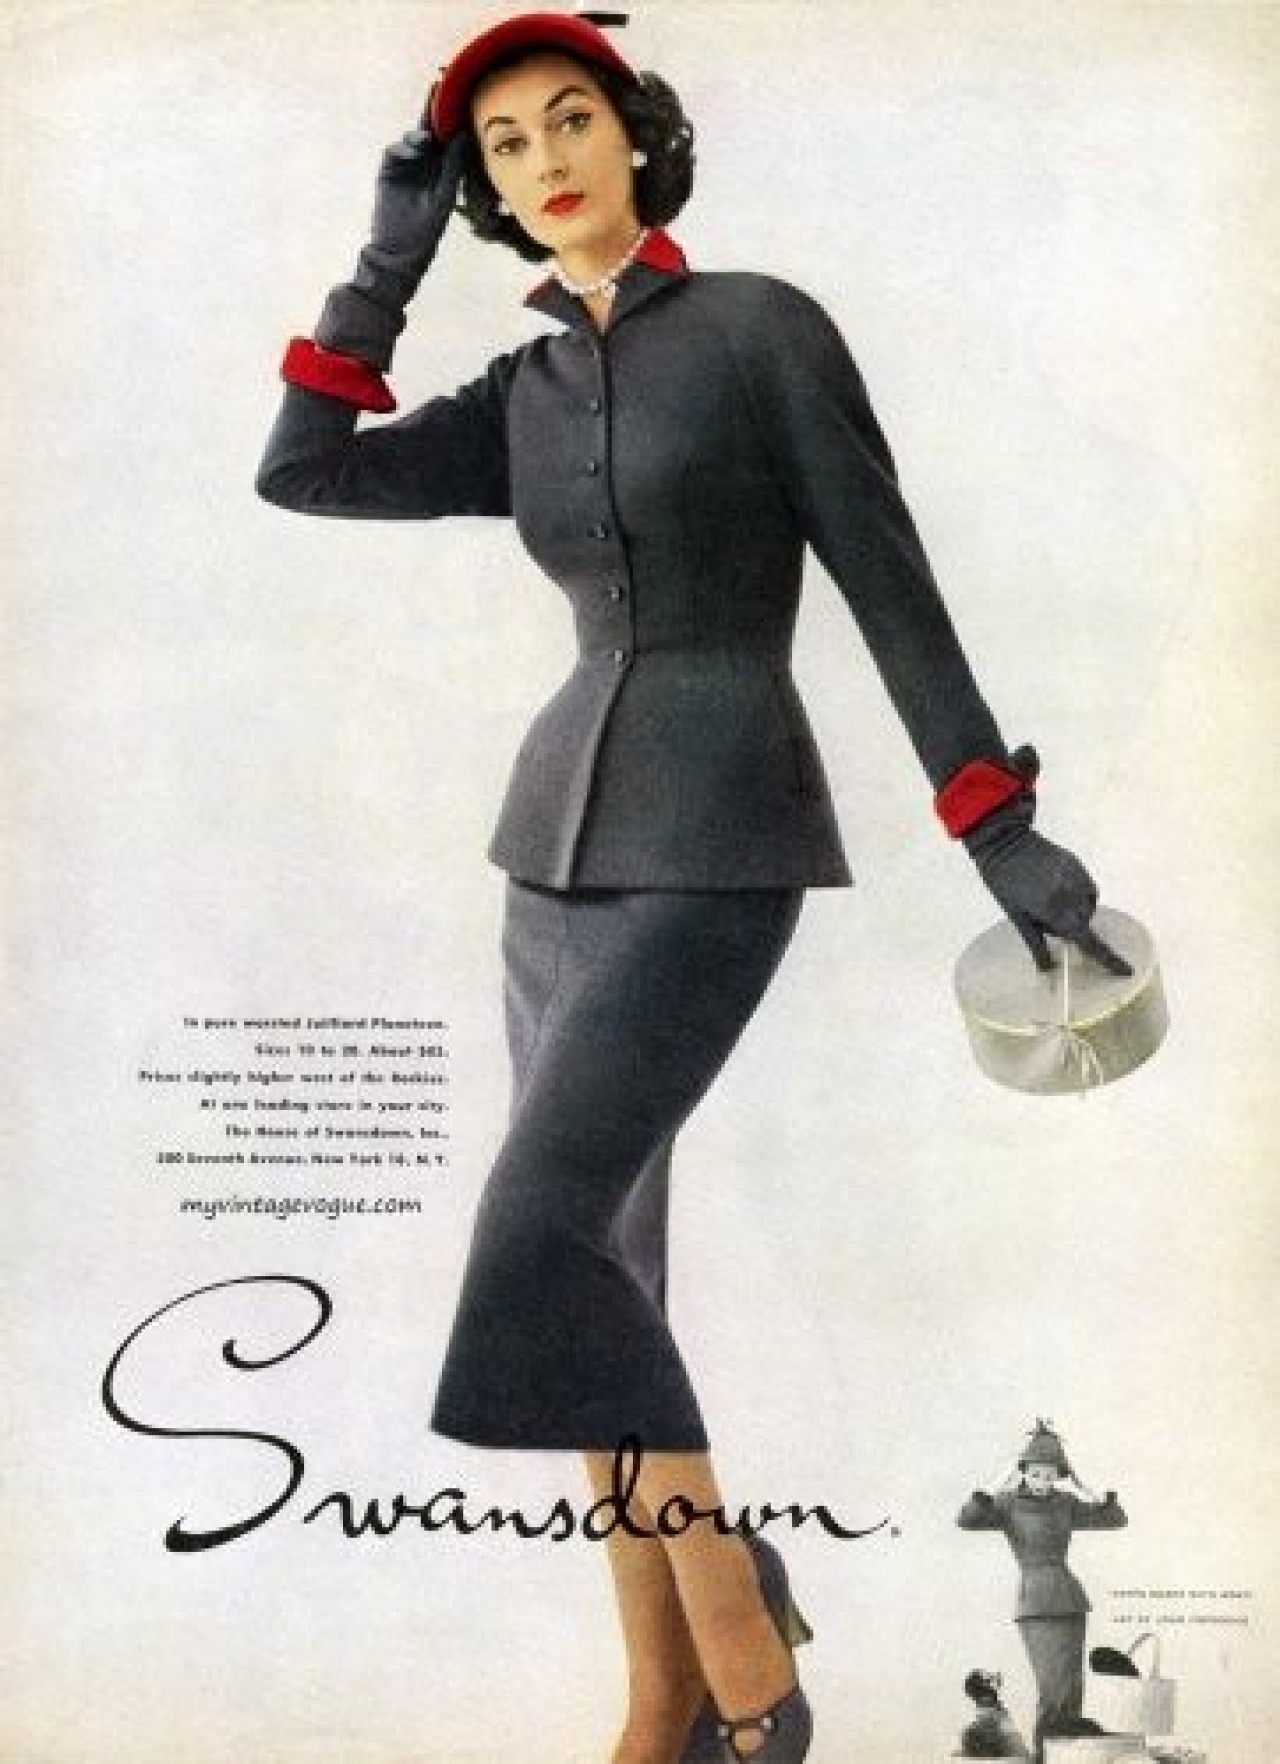 Women, Fashion, & Society: A Timeline of Women's Suit History